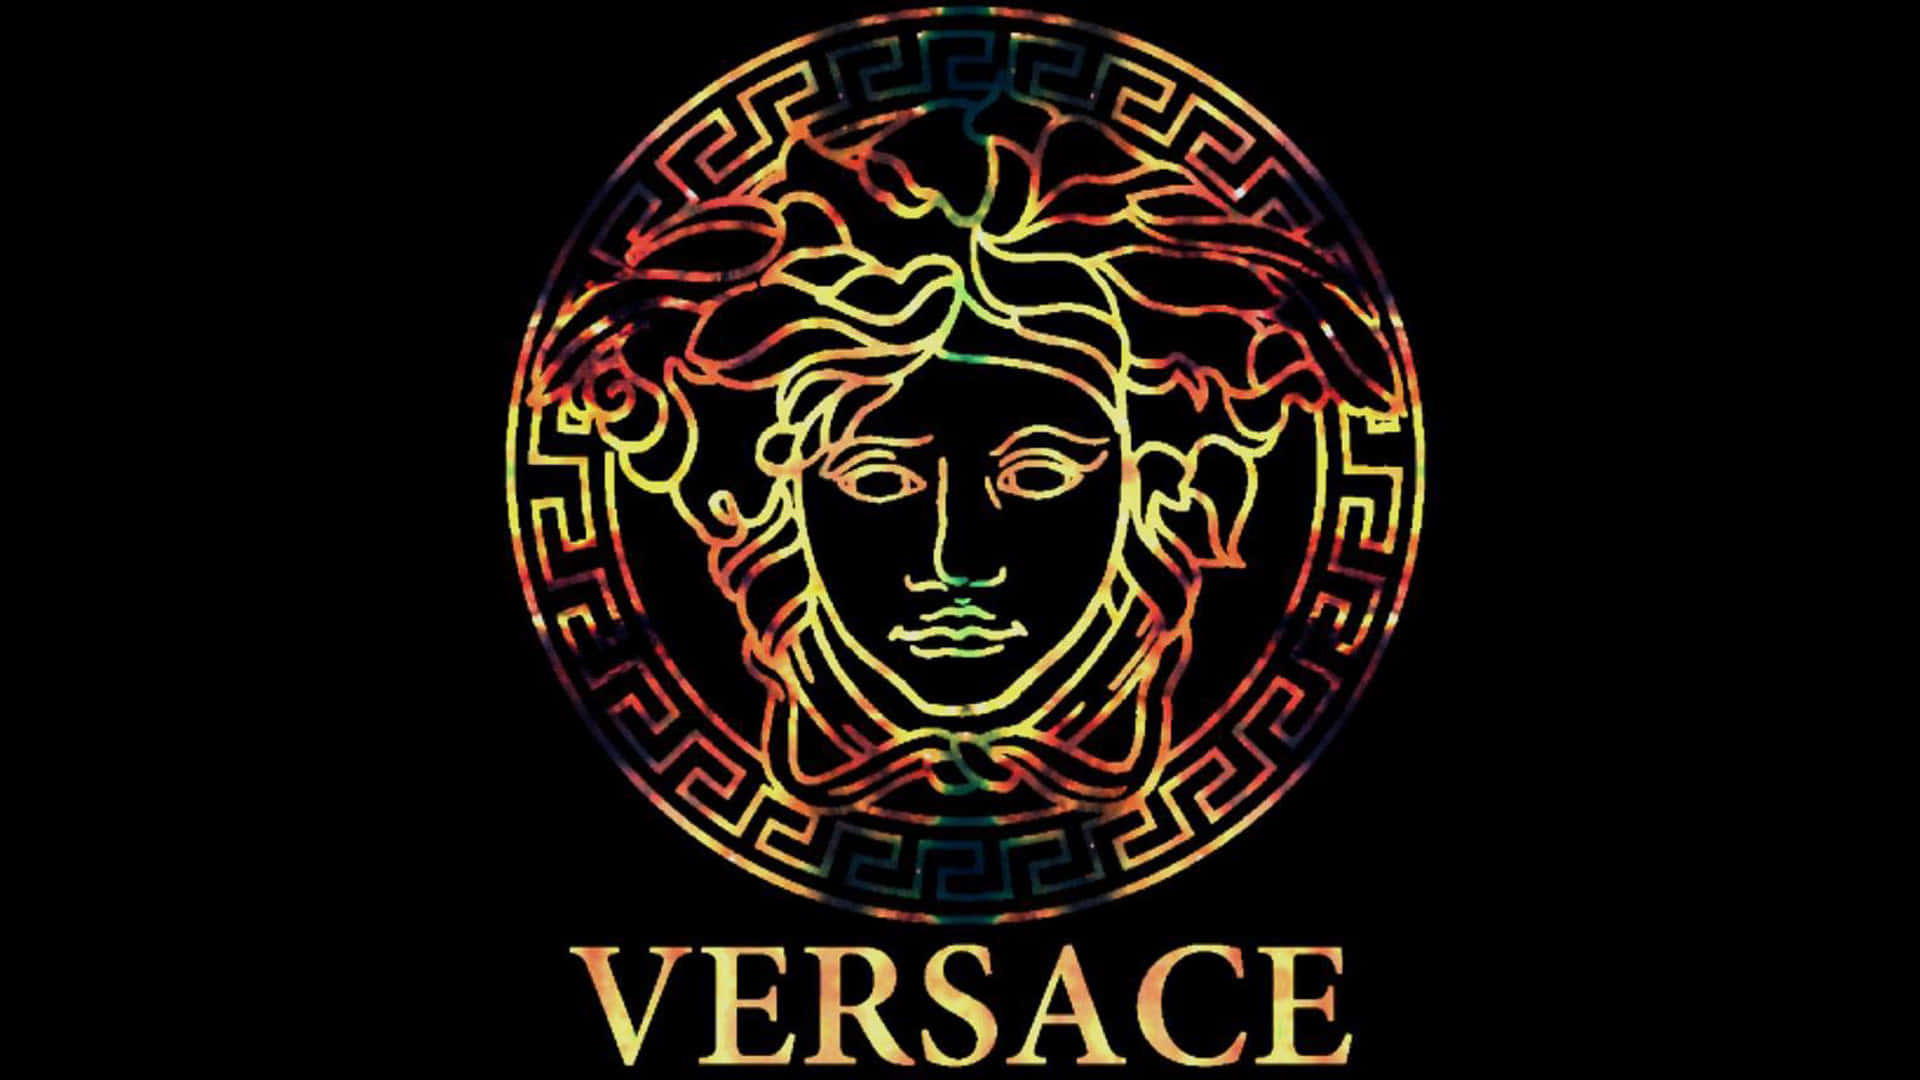 Unleash your sensual side with Versace